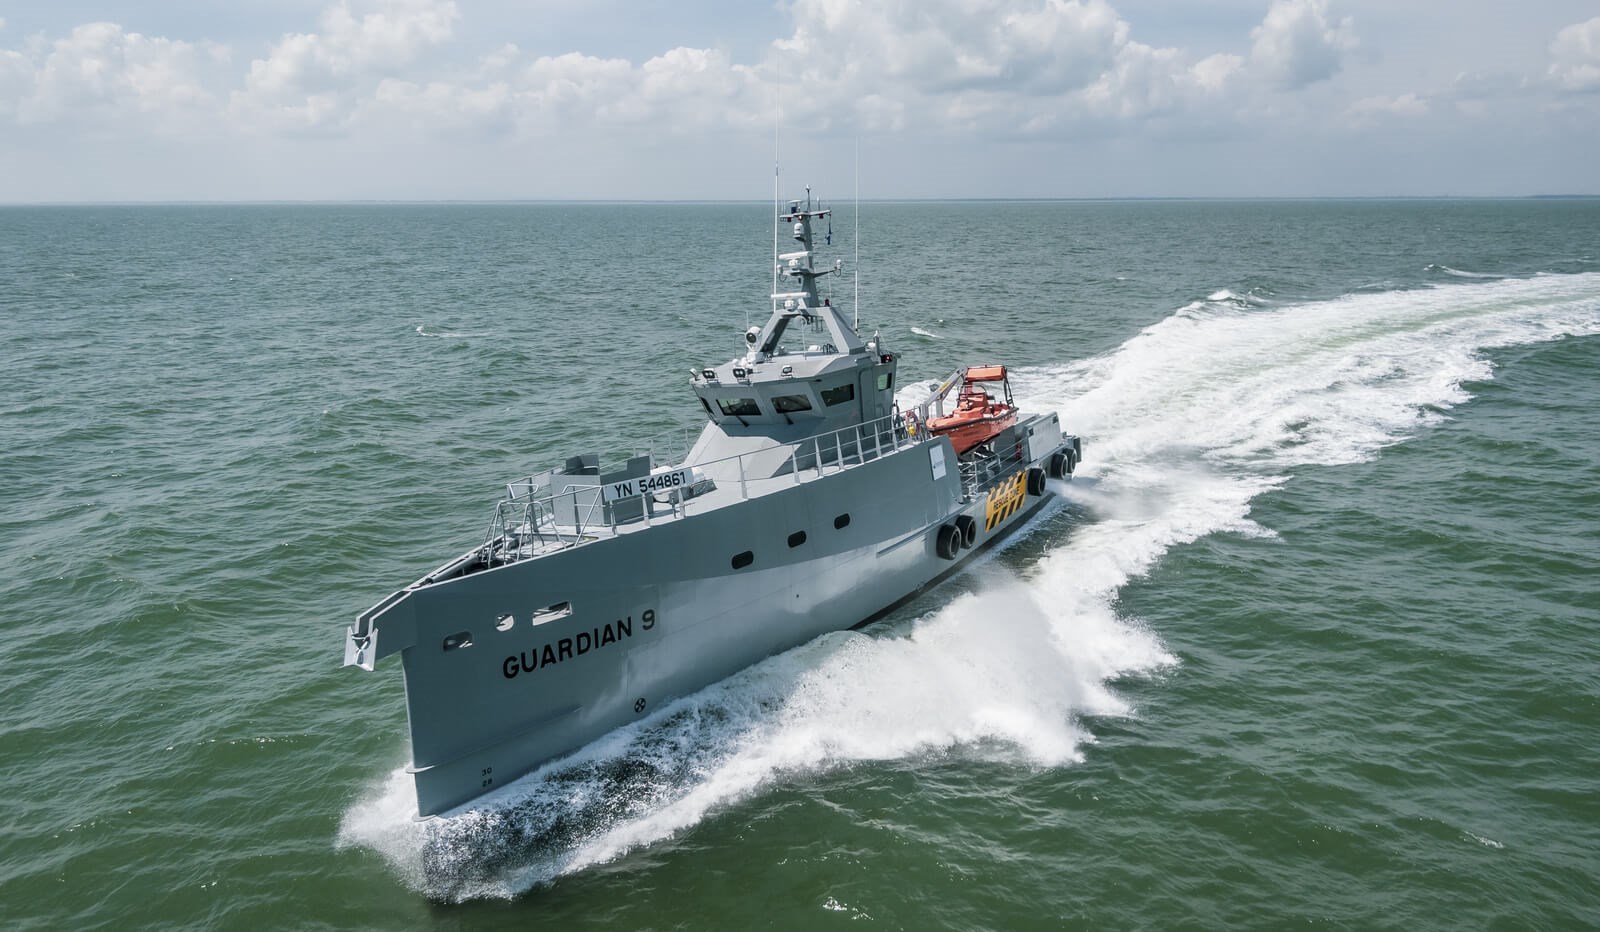 Homeland IOS Ltd takes delivery of the latest Damen FCS 3307 Patrol vessel